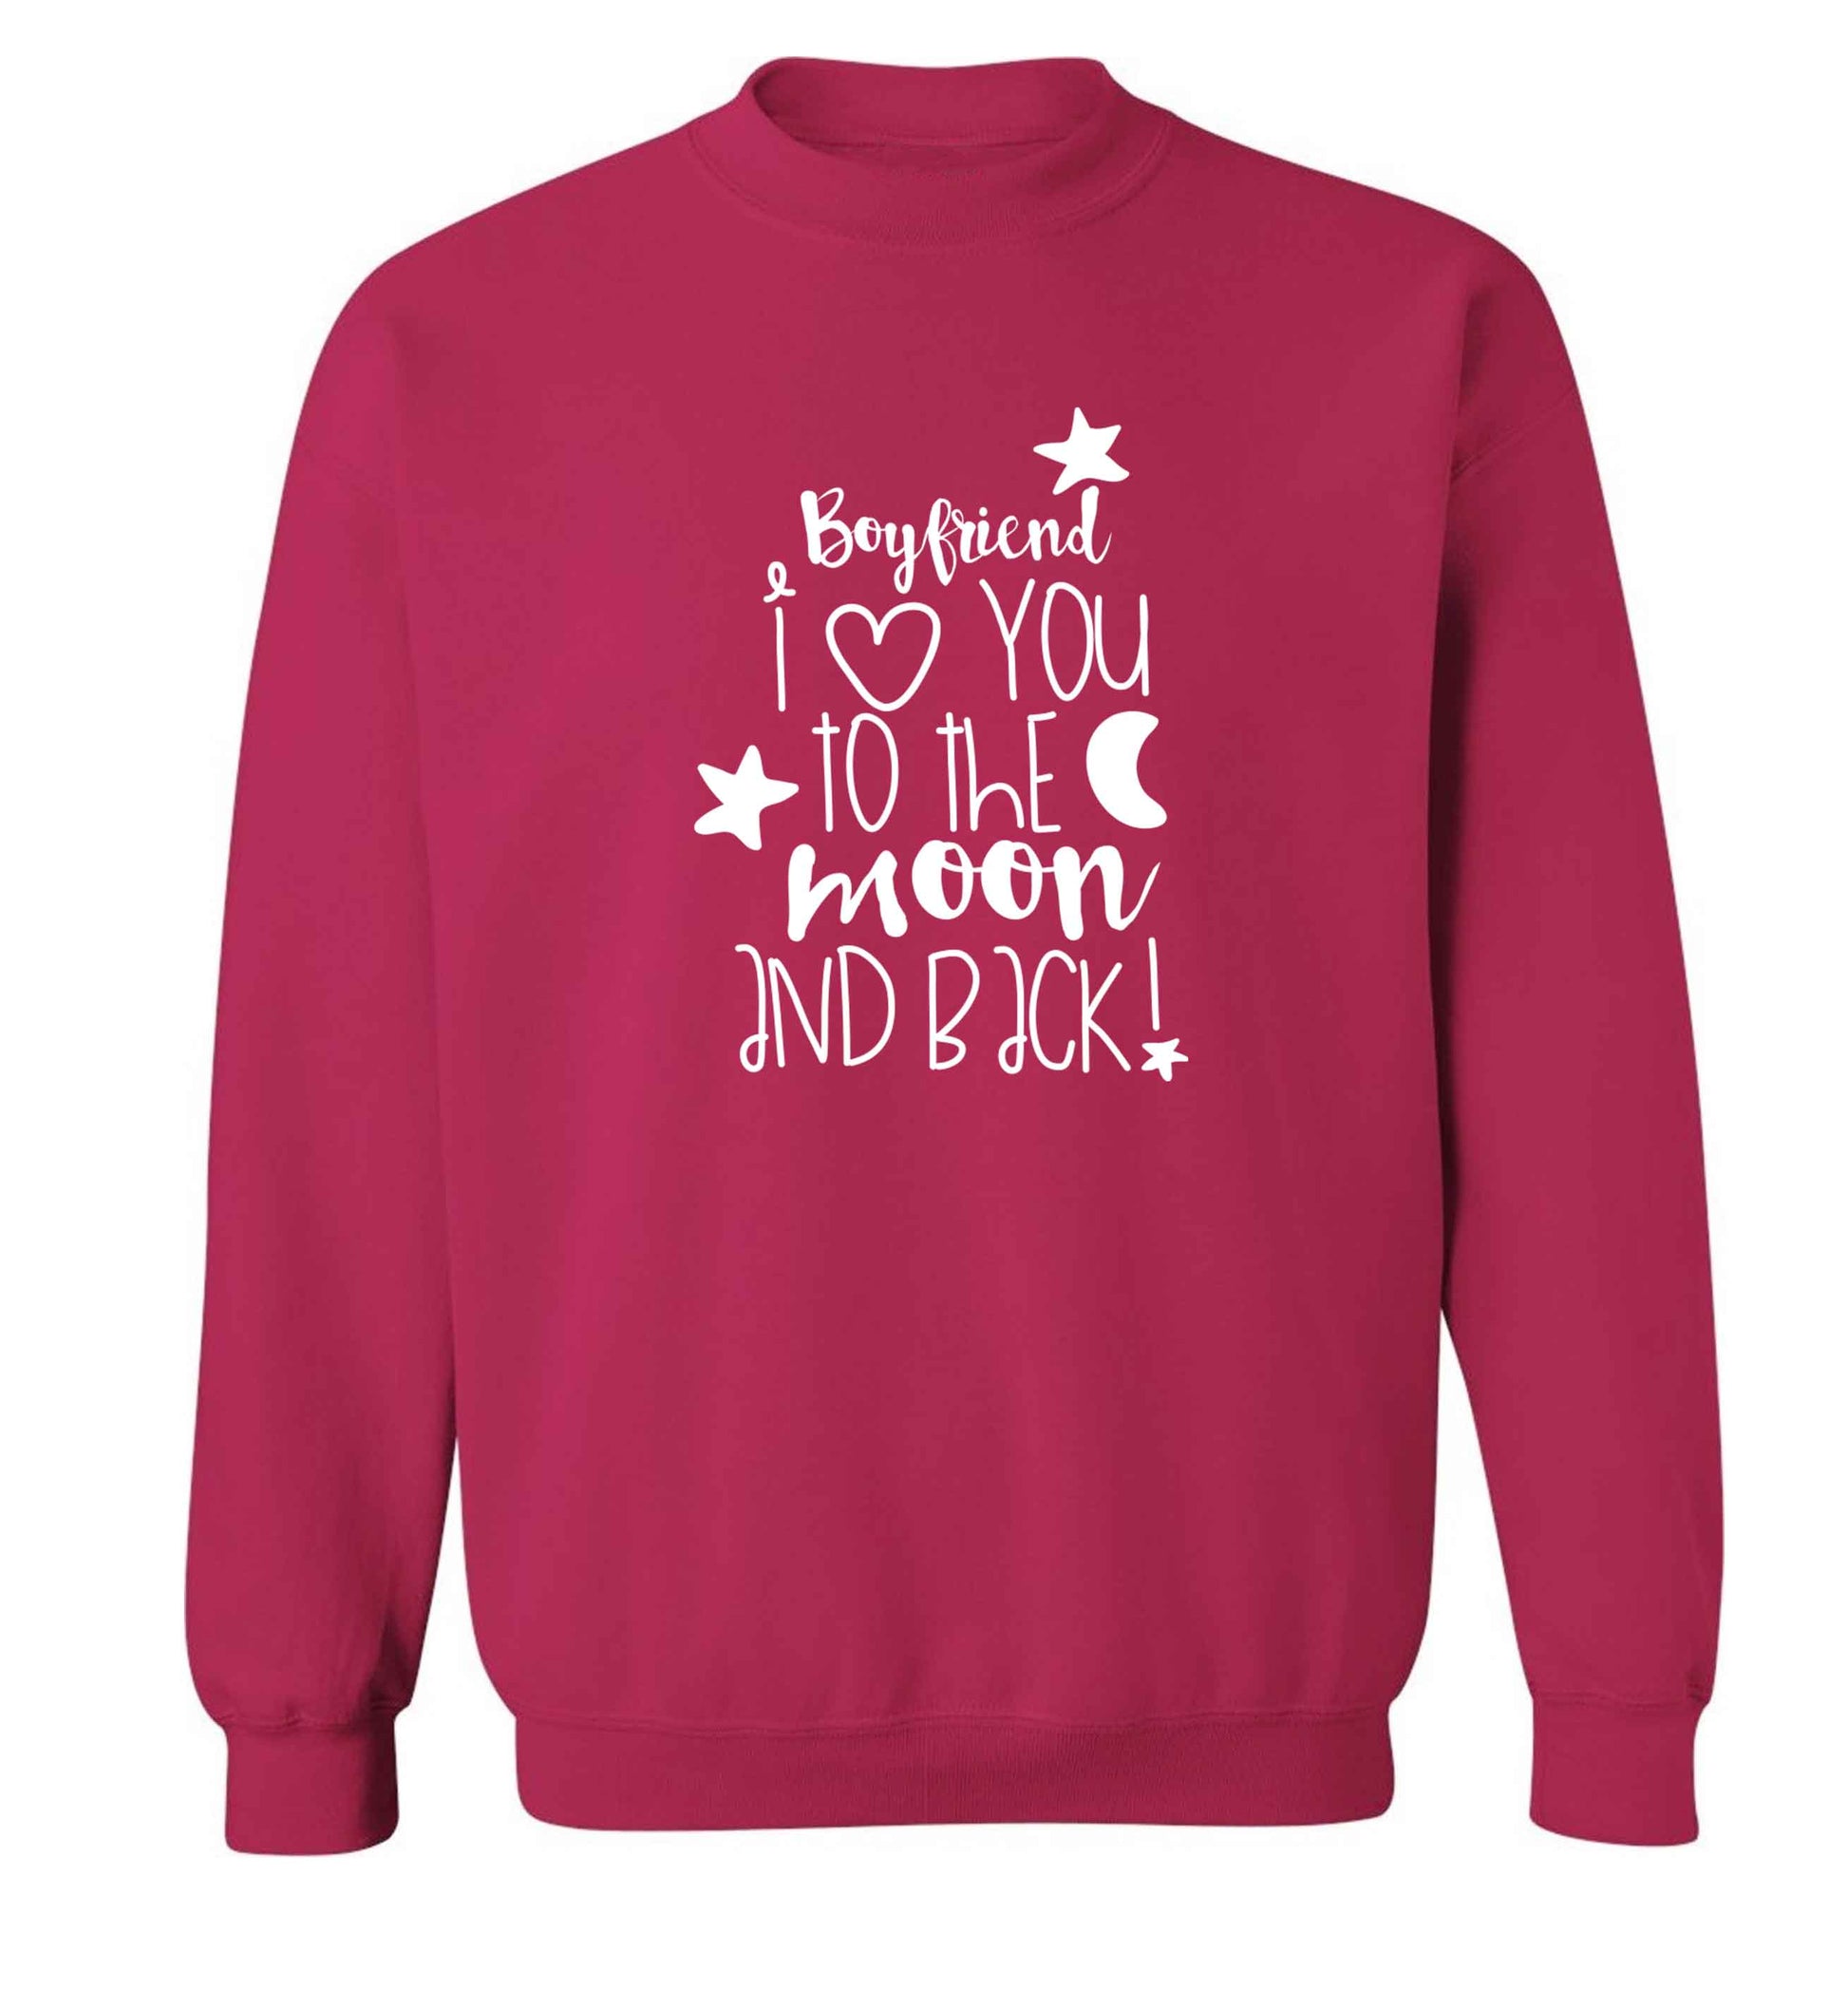 Boyfriend I love you to the moon and back adult's unisex pink sweater 2XL